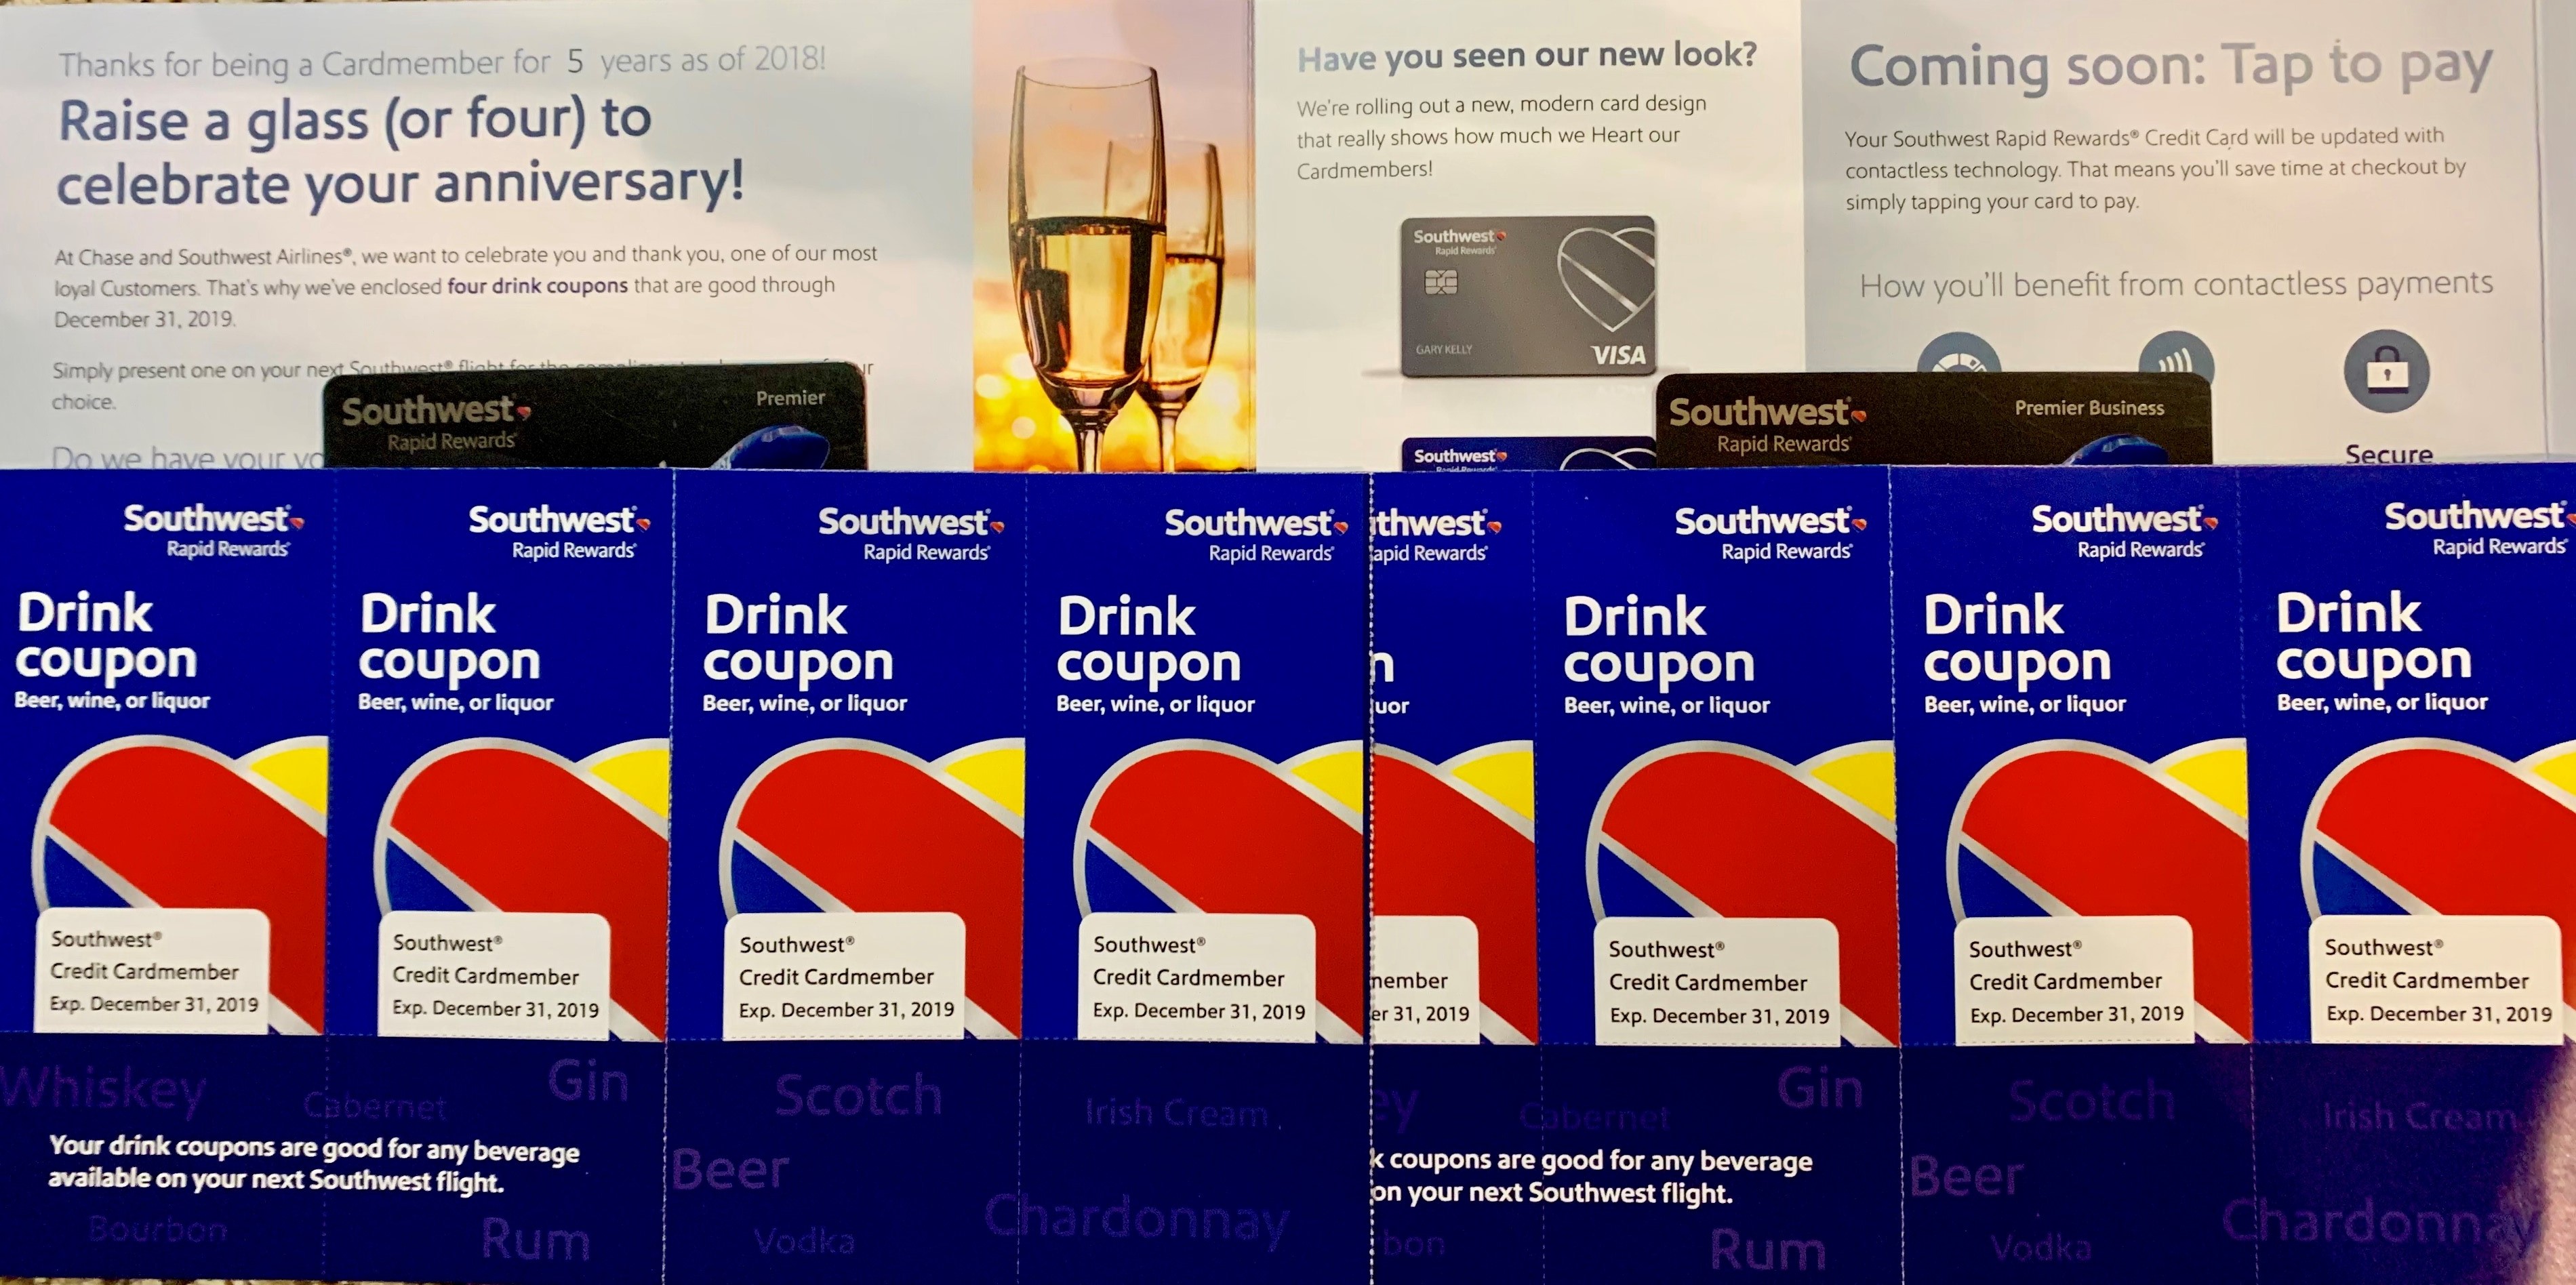 Free Drink Coupons - The Southwest Airlines Community